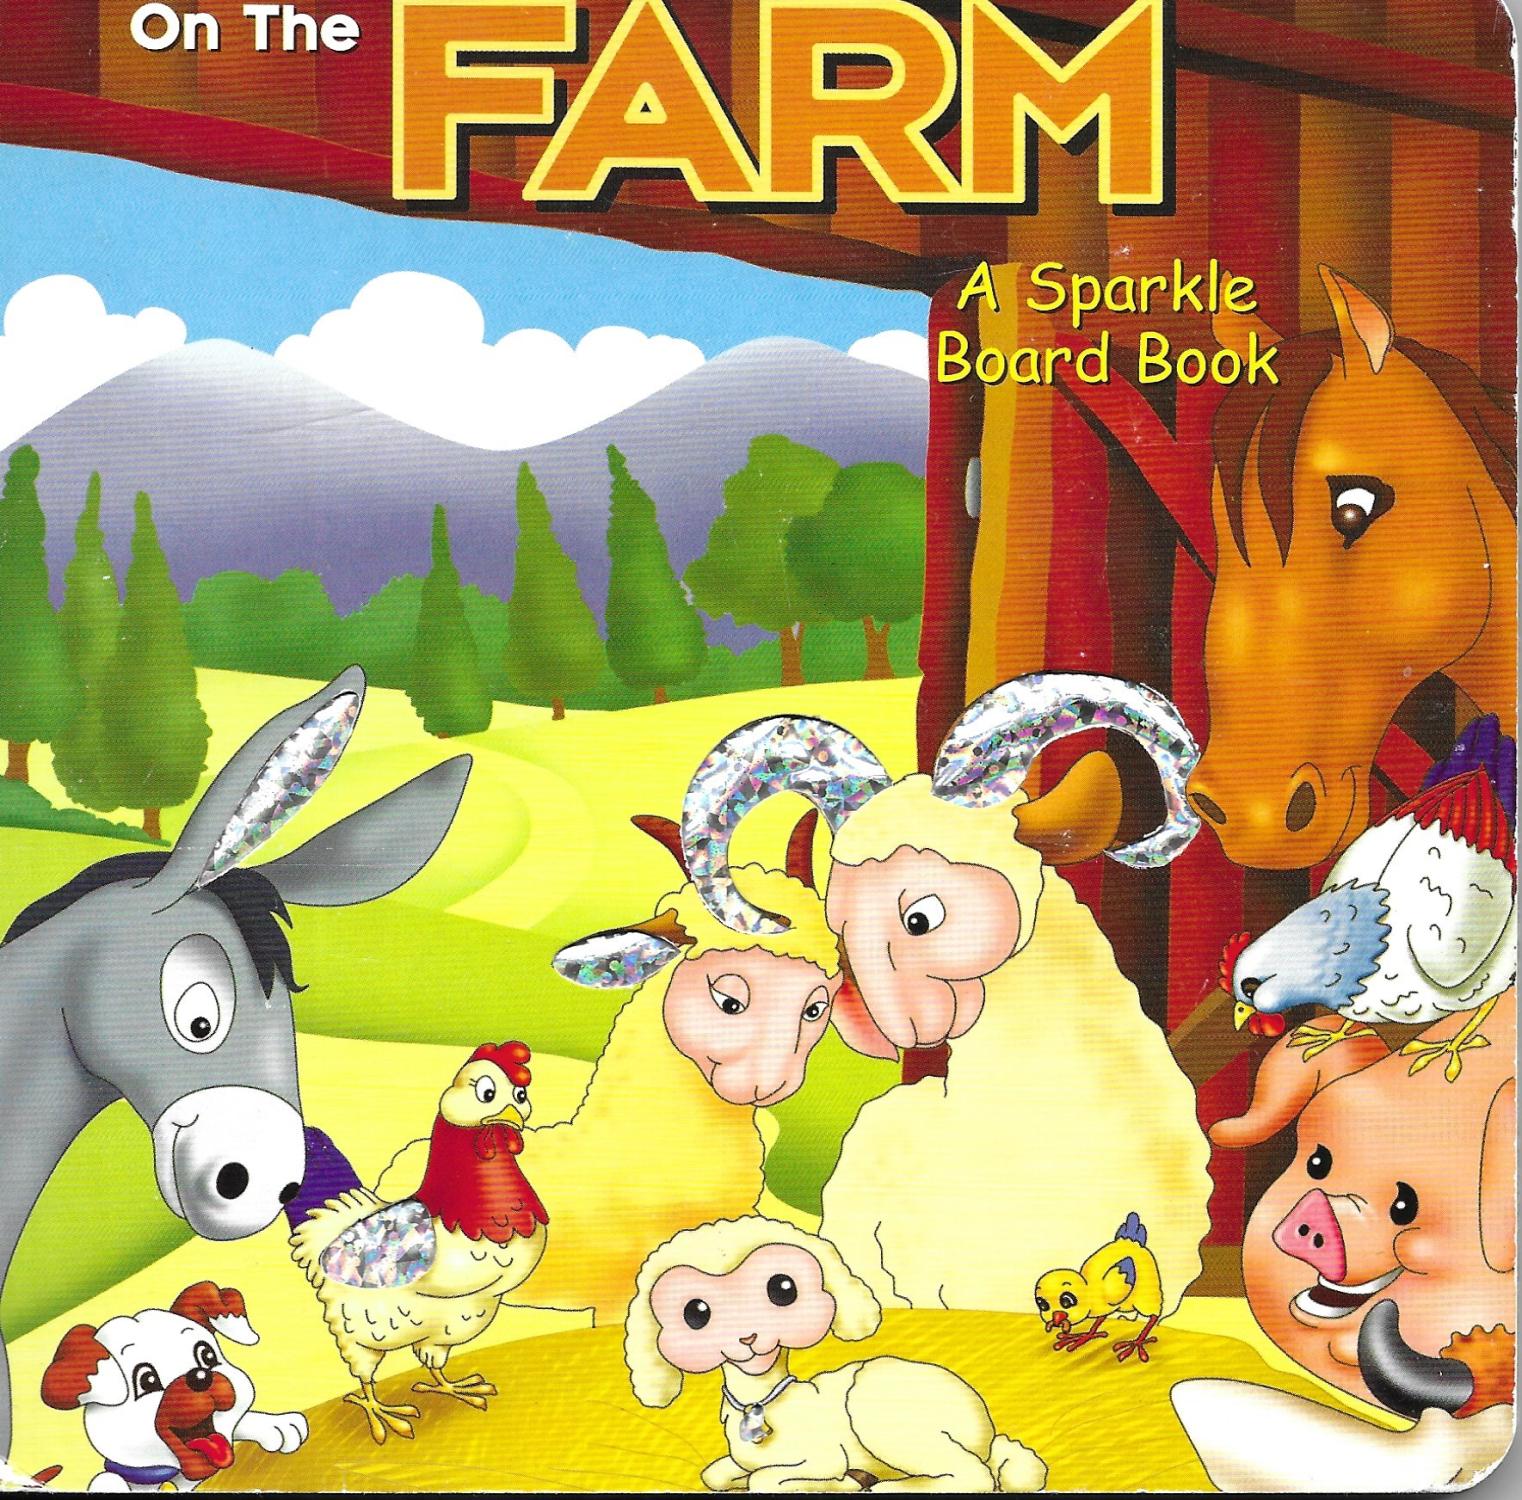 On The Farm: A Sparkle Board Book: As New Hardcover (2005)